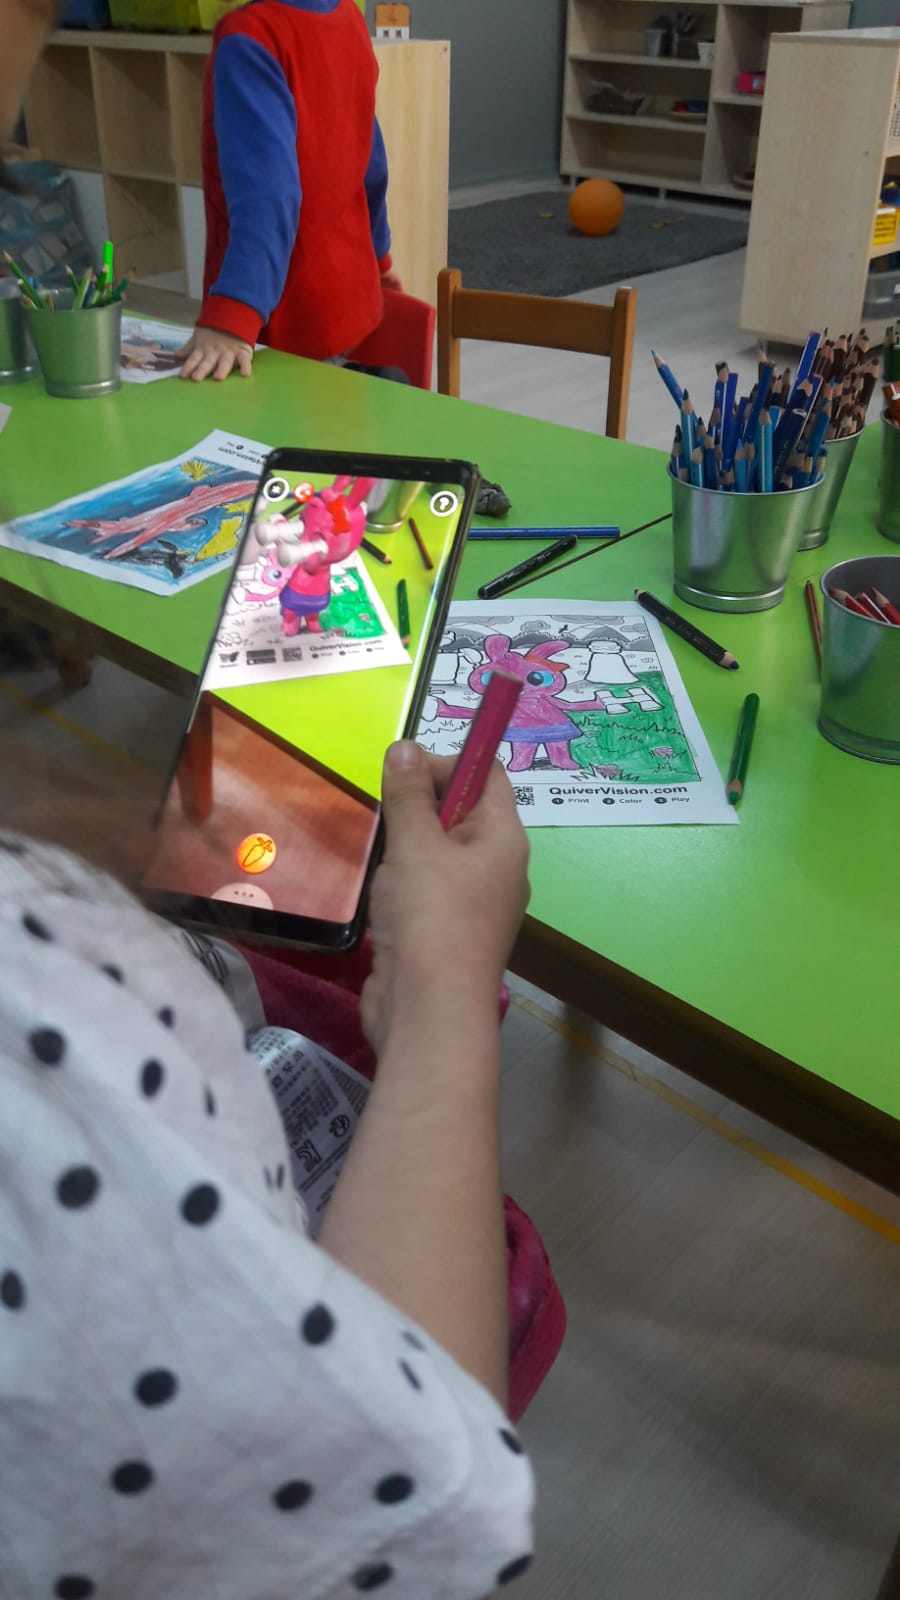 Coloring Packs Quivervision 3d Augmented Reality Coloring Apps